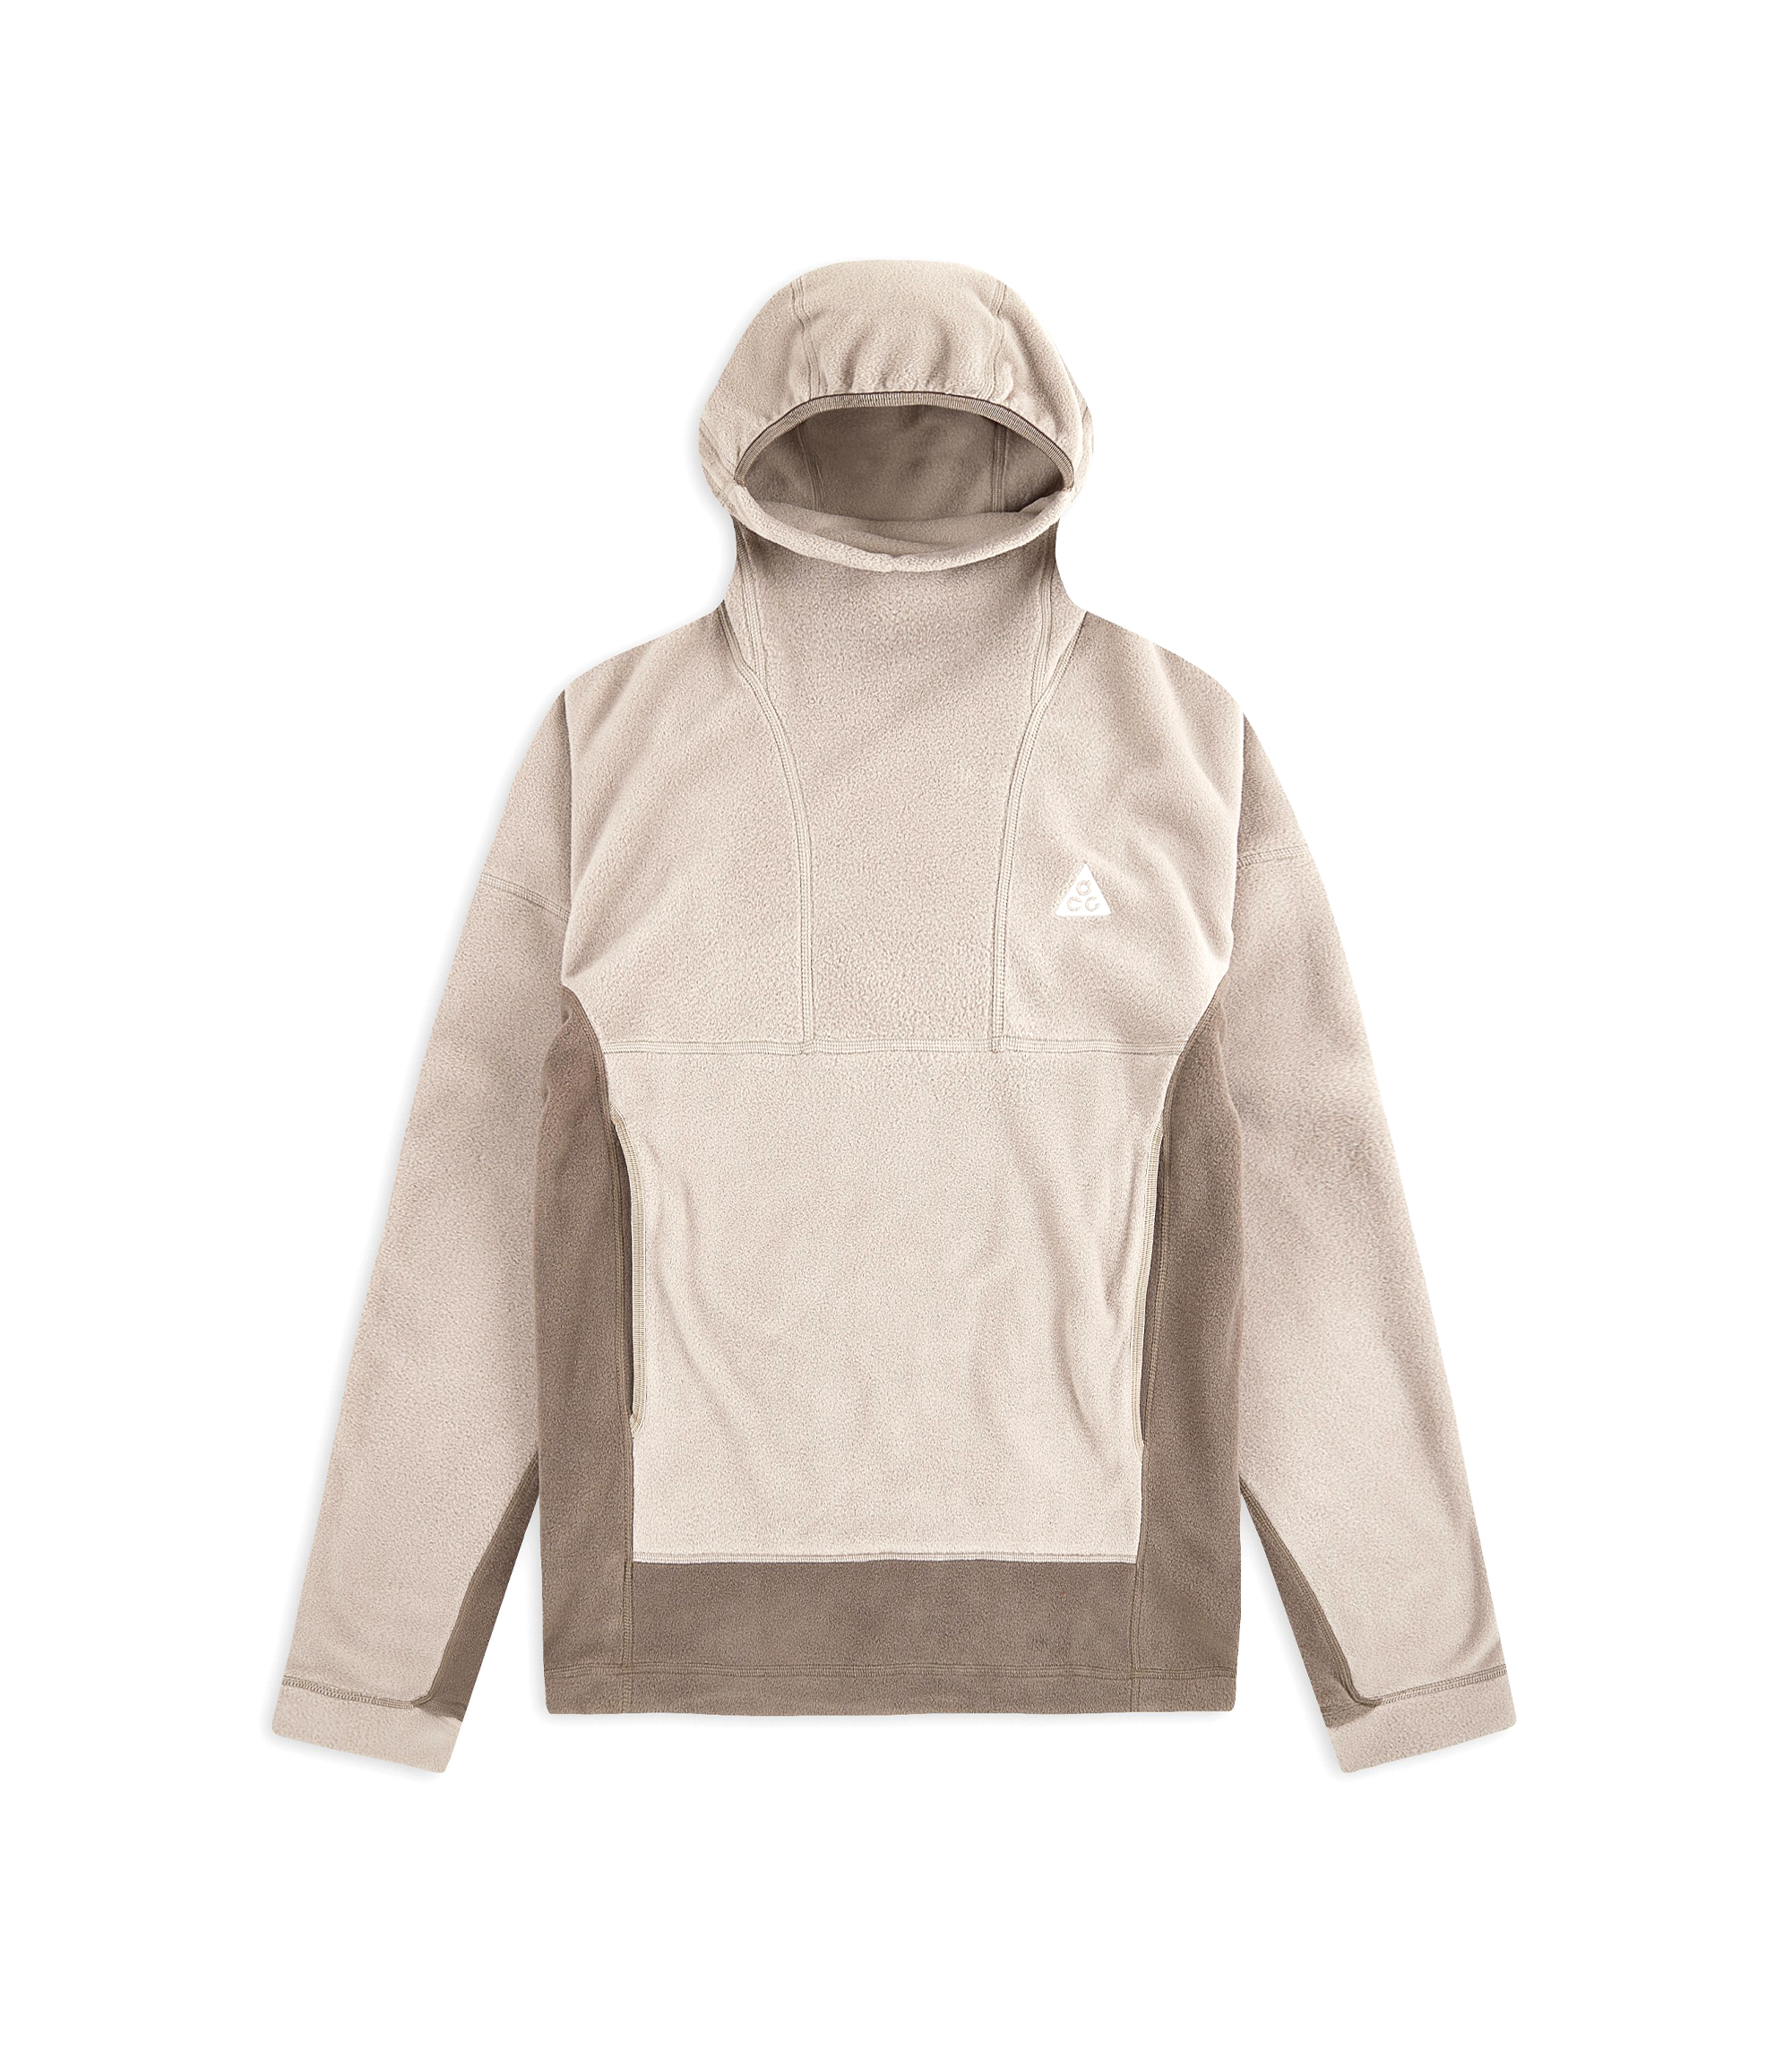 Wolf Tree Therma-Fit Hooded Sweatshirt - Moon Fossil / Olive Gray / Summit White